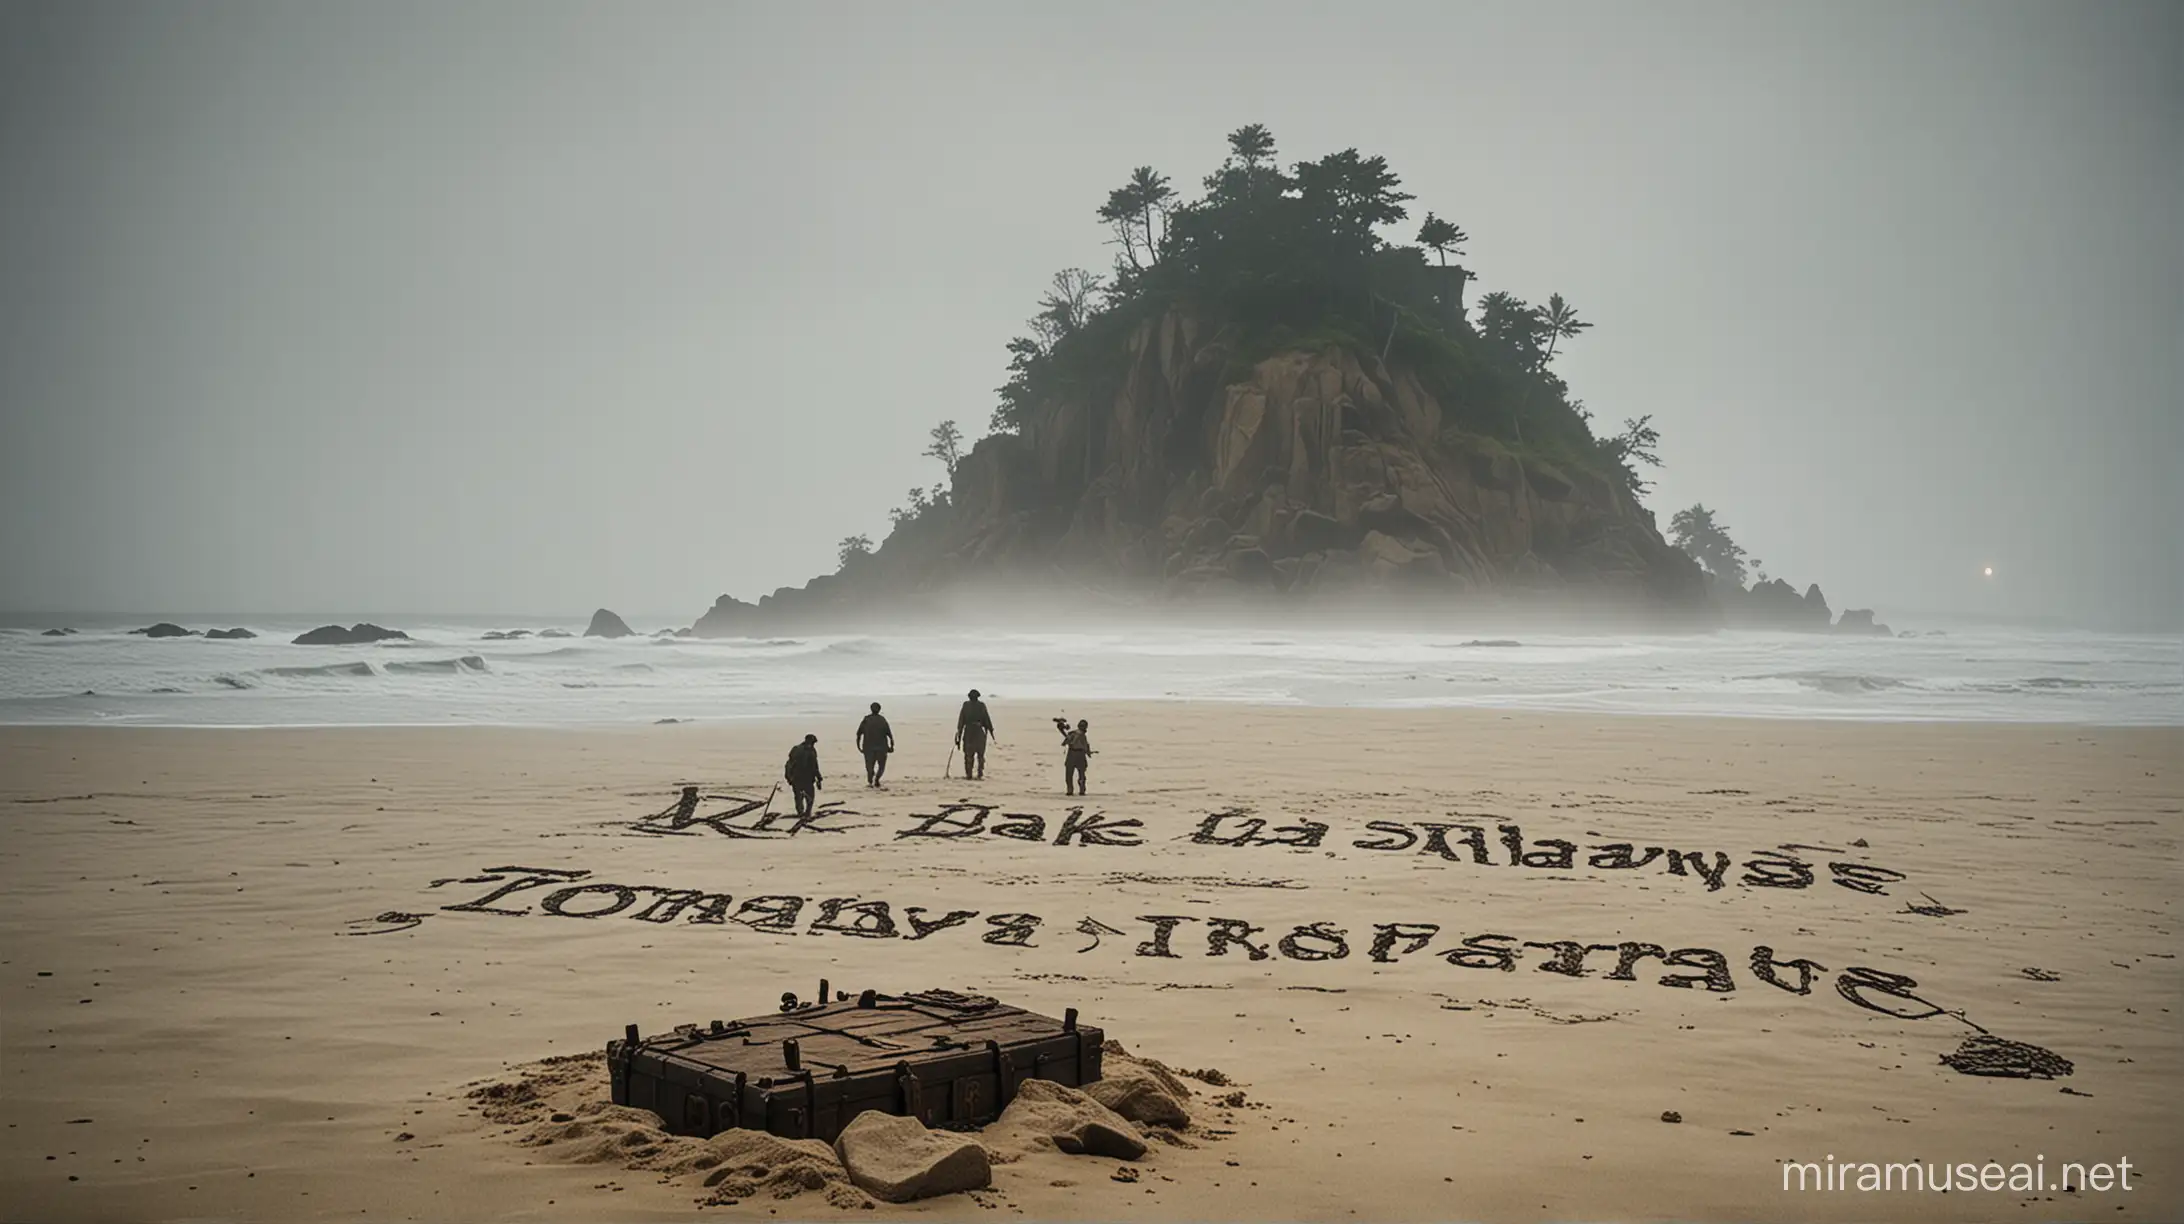 Show a mysterious island surrounded by mist, with an old, weathered treasure chest half-buried in the sand. In the background, silhouette figures of explorers with torches can be seen, hinting at the ongoing quest for the hidden treasure. Above the island, the words "Oak Island: Rahasyamayi Khazane Ka Parda Faash" are written in bold, mysterious font, adding to the intrigue of the scene.